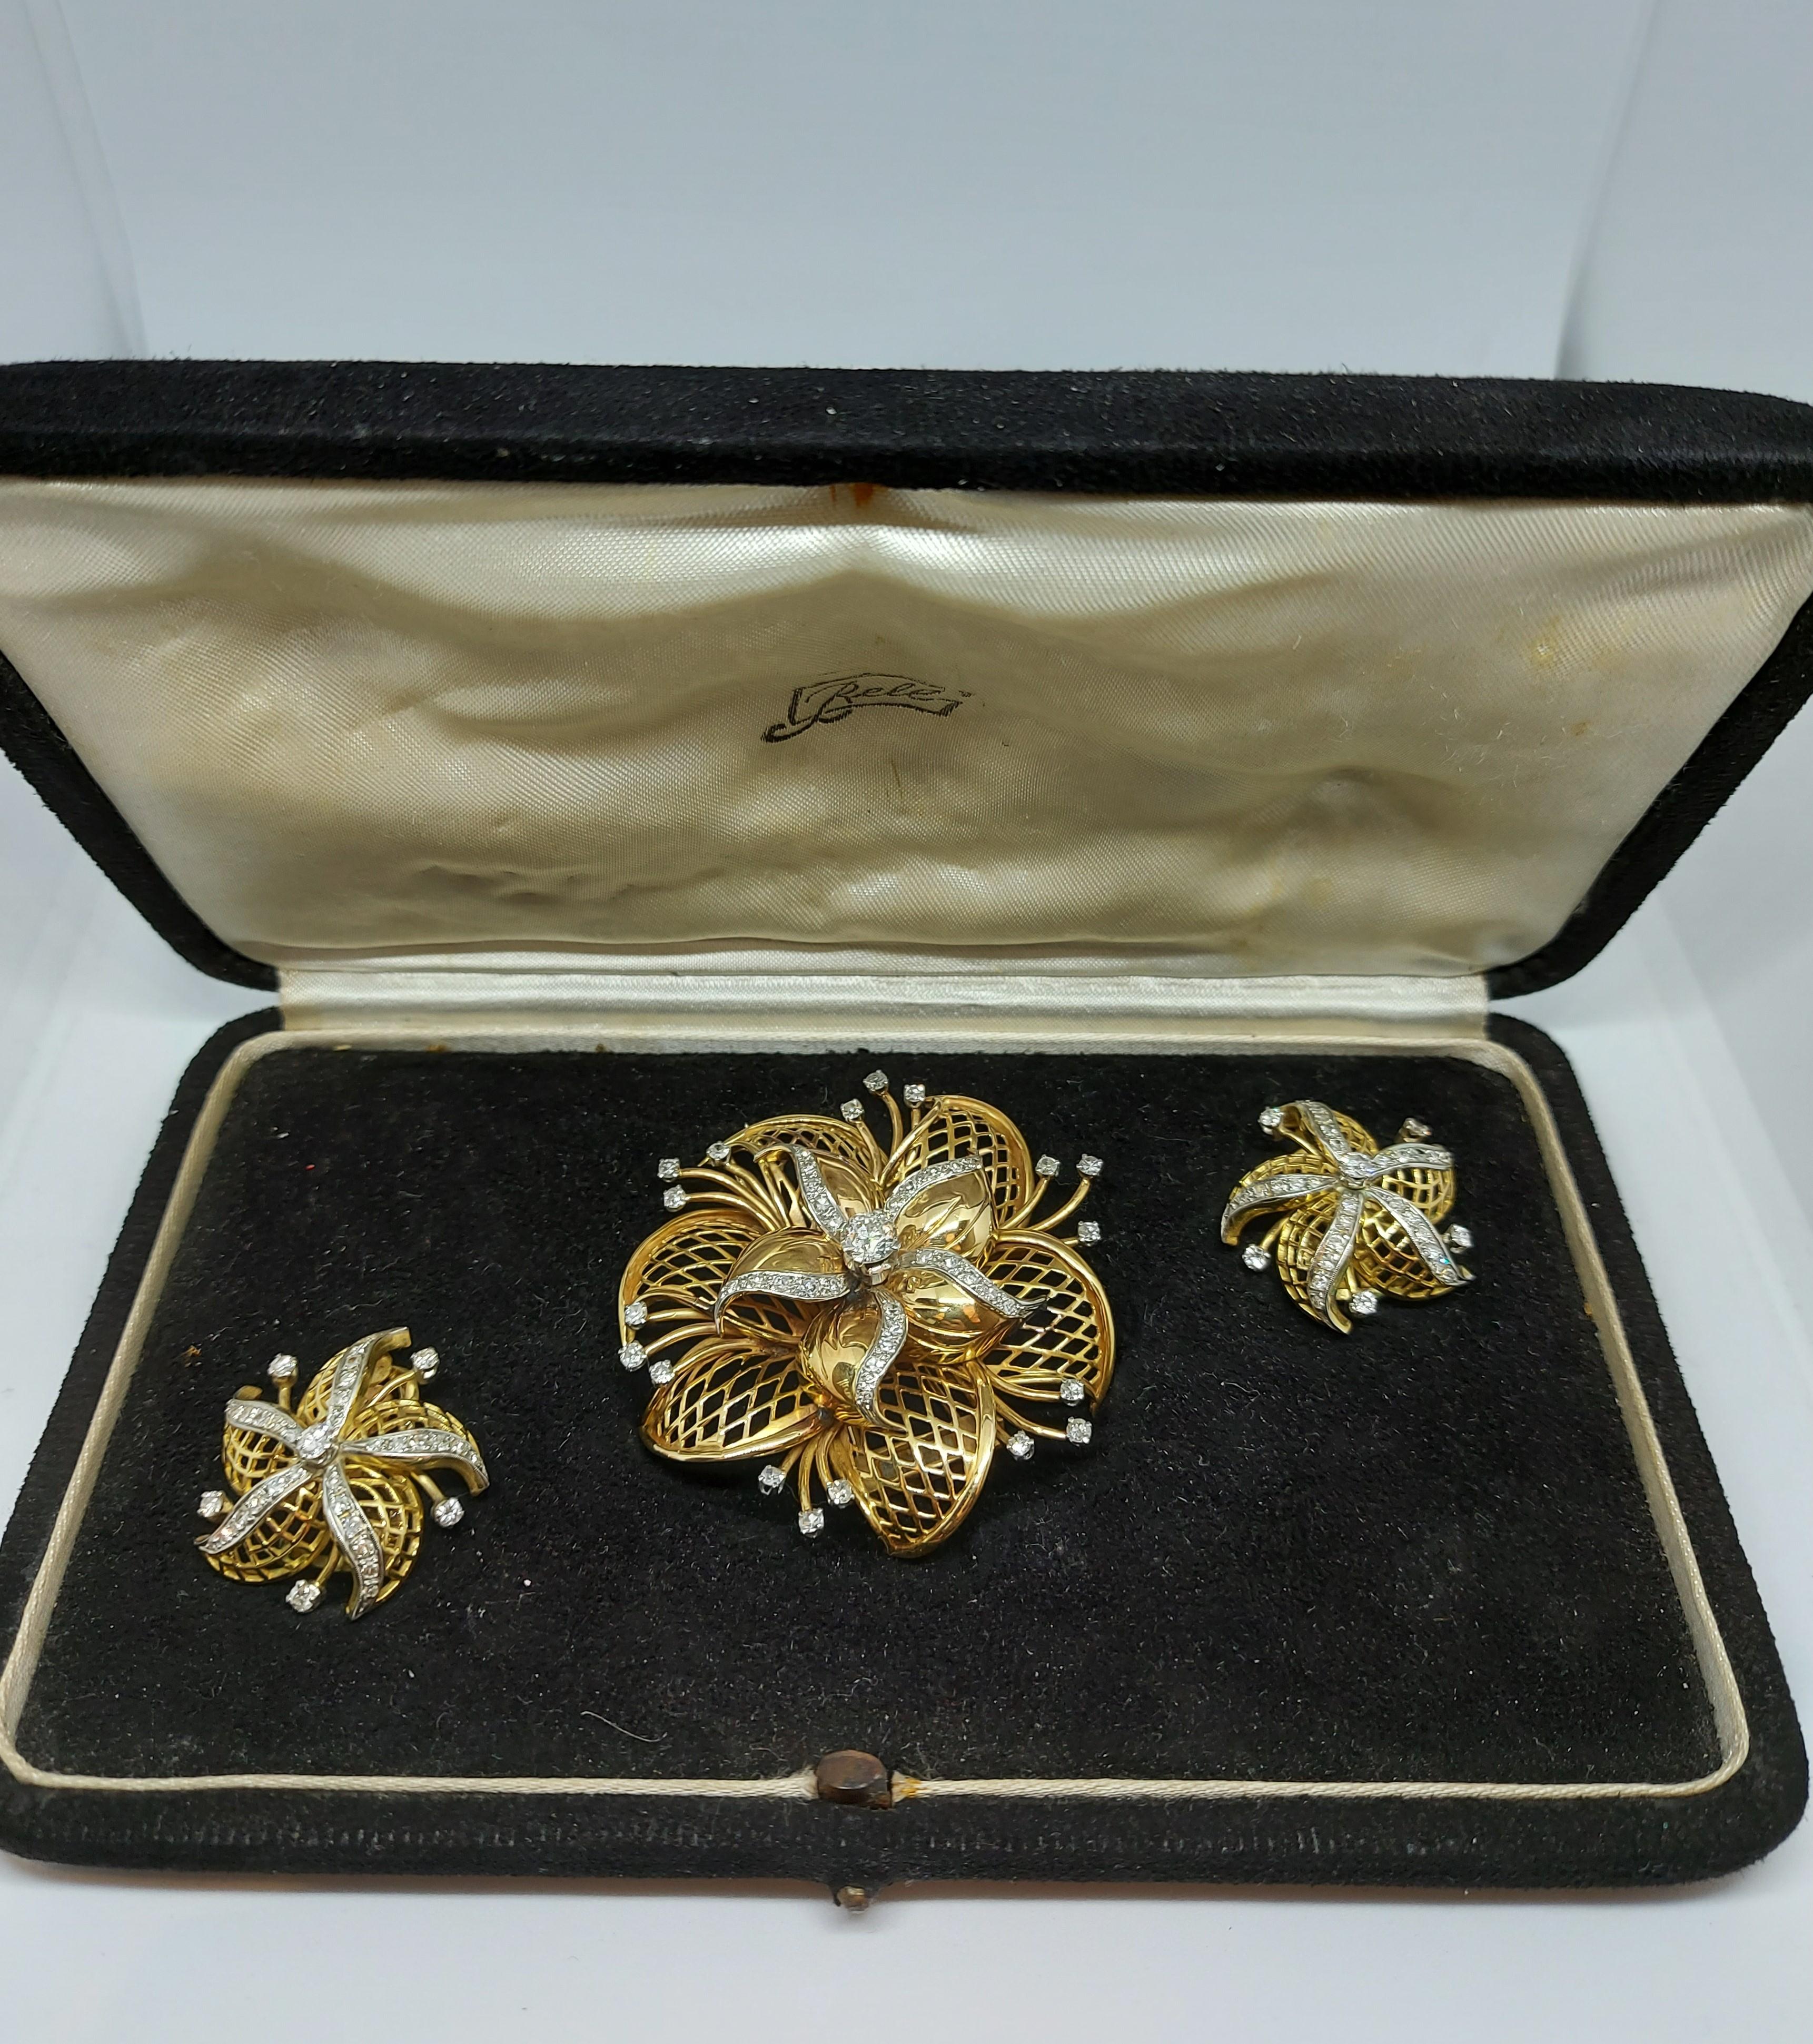 Stunning 18kt Yellow Gold set Brooch / Clip-On Earrings With Diamonds

Brooch:
Diamonds: 43  8 cut round  diamonds and 1 big round old cut diamond of ca. 1 ct

Material: 18 kt yellow gold

Total weight: 28.2 gram / 0.995 oz / 18.2 dwt

Measurements: